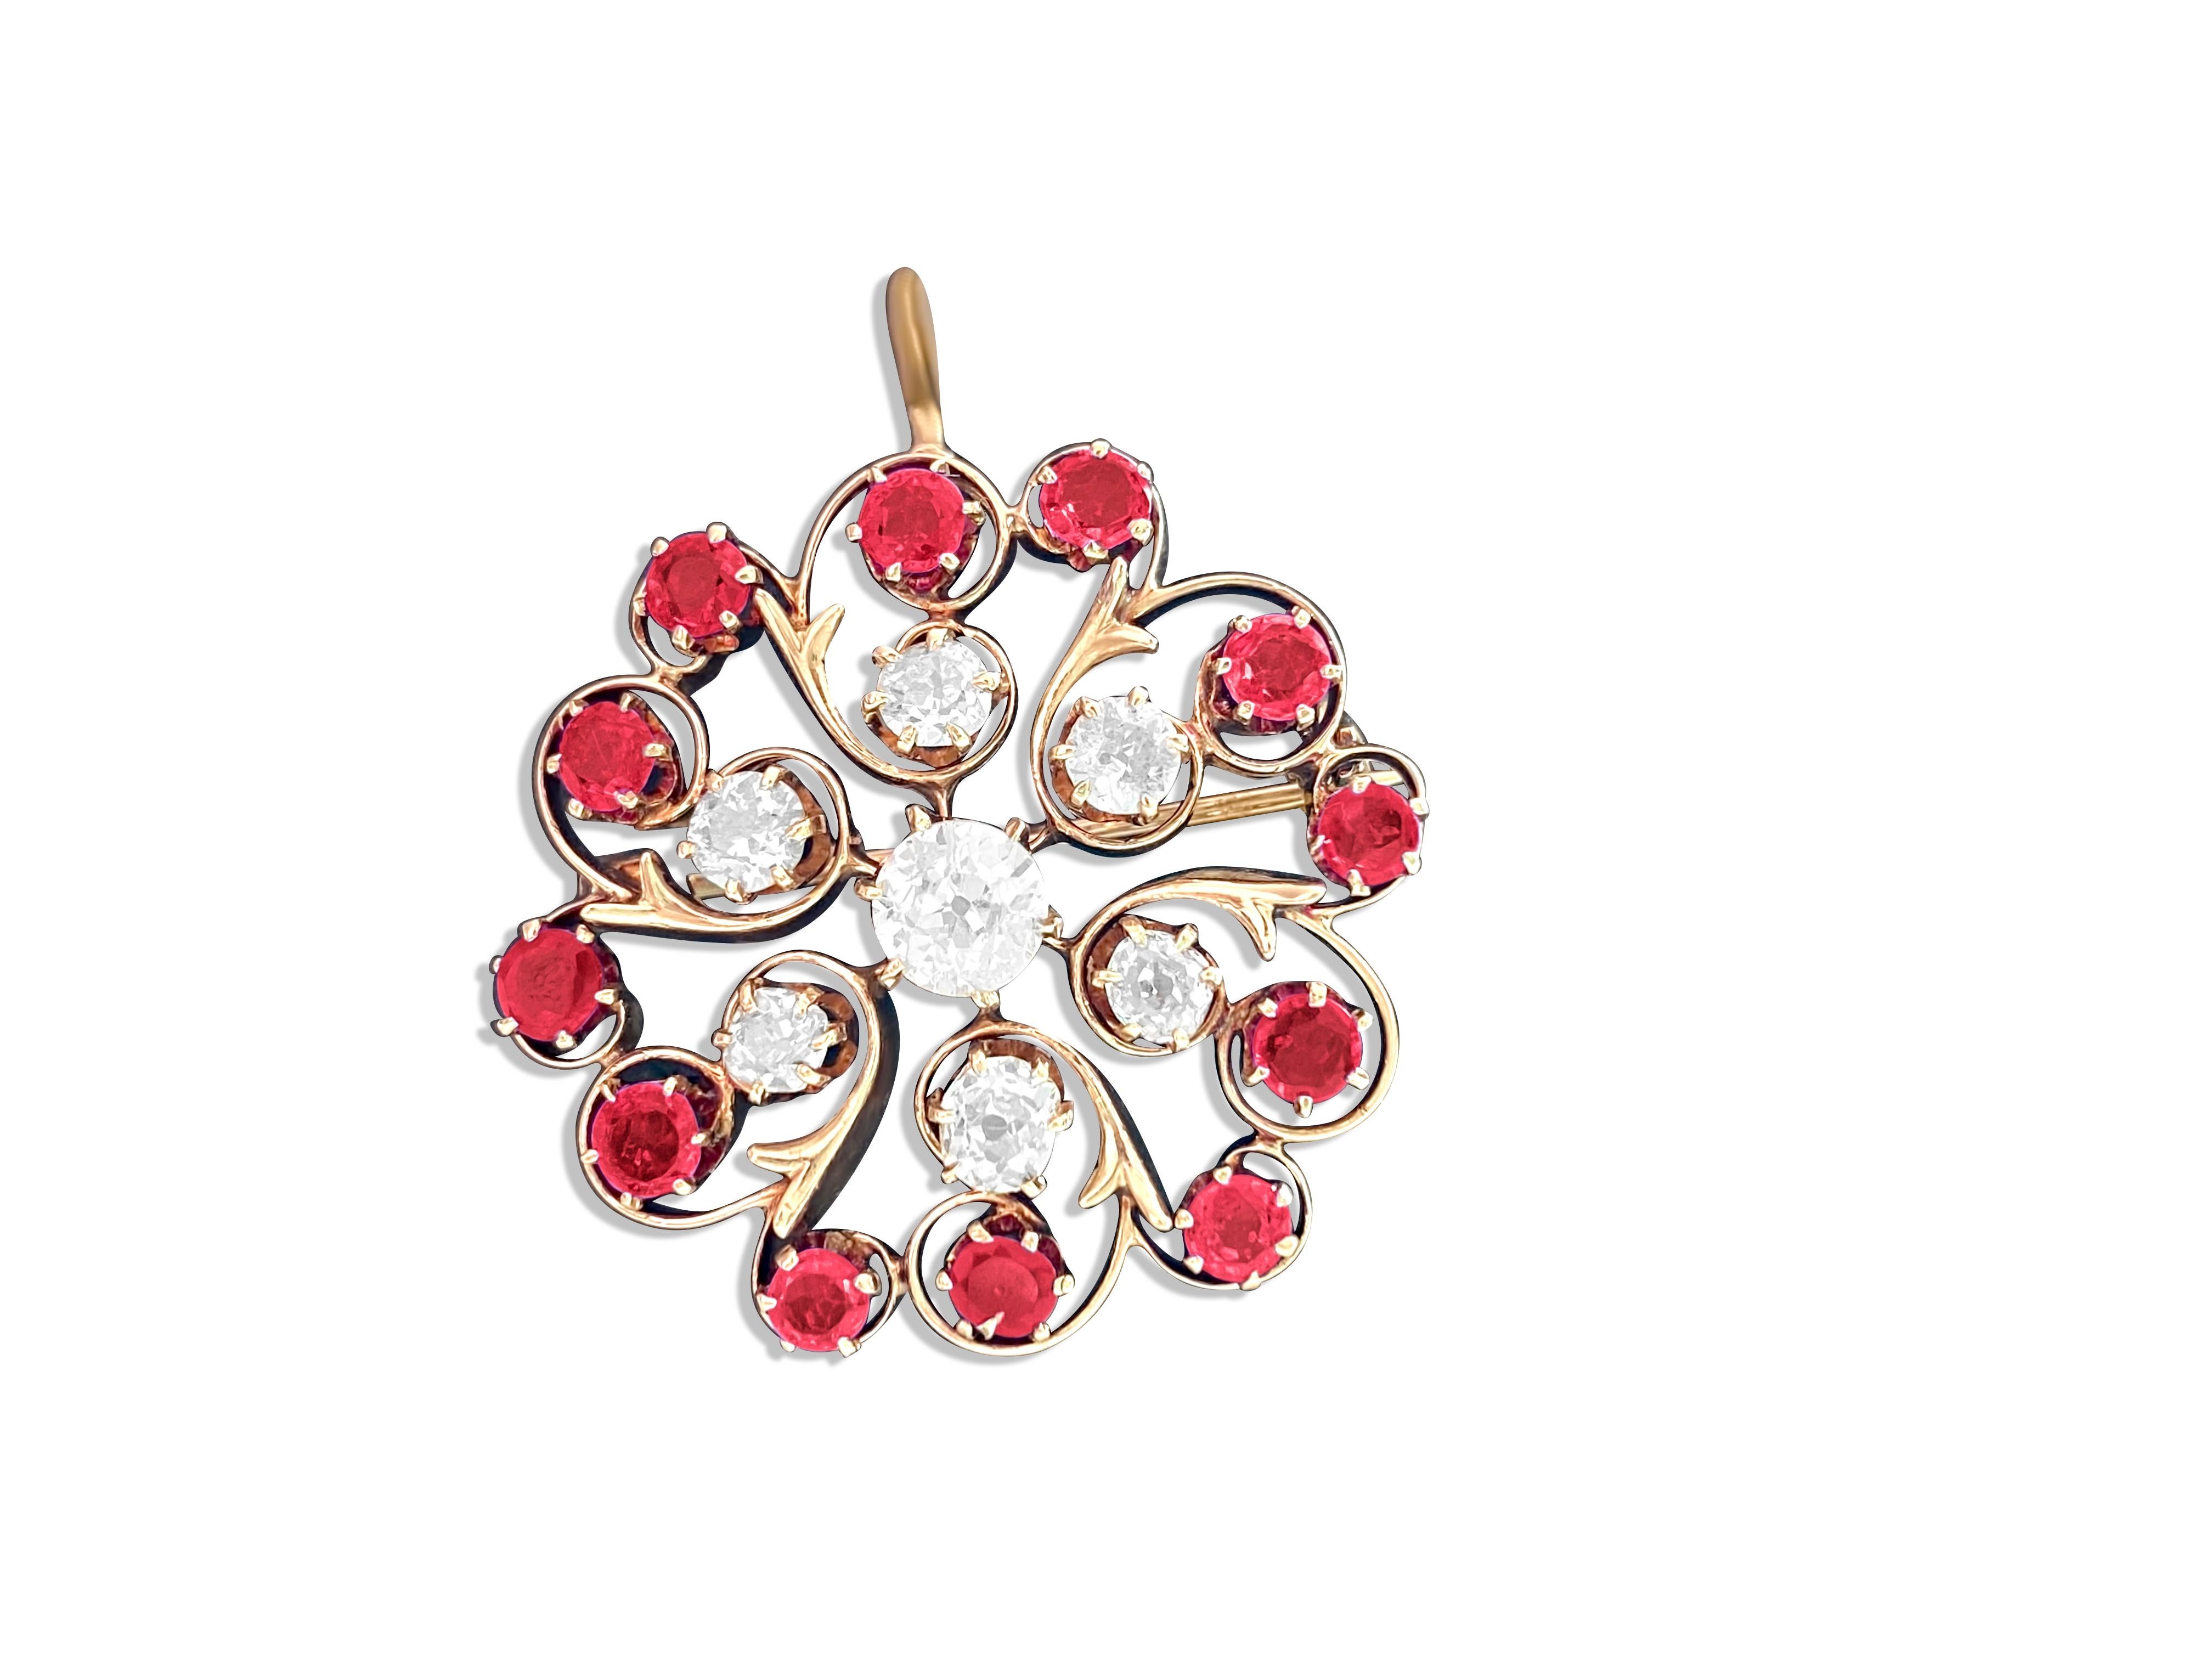 Women's or Men's Antique European 3.70 Ct Diamond and Ruby Pin. (GIA) For Sale